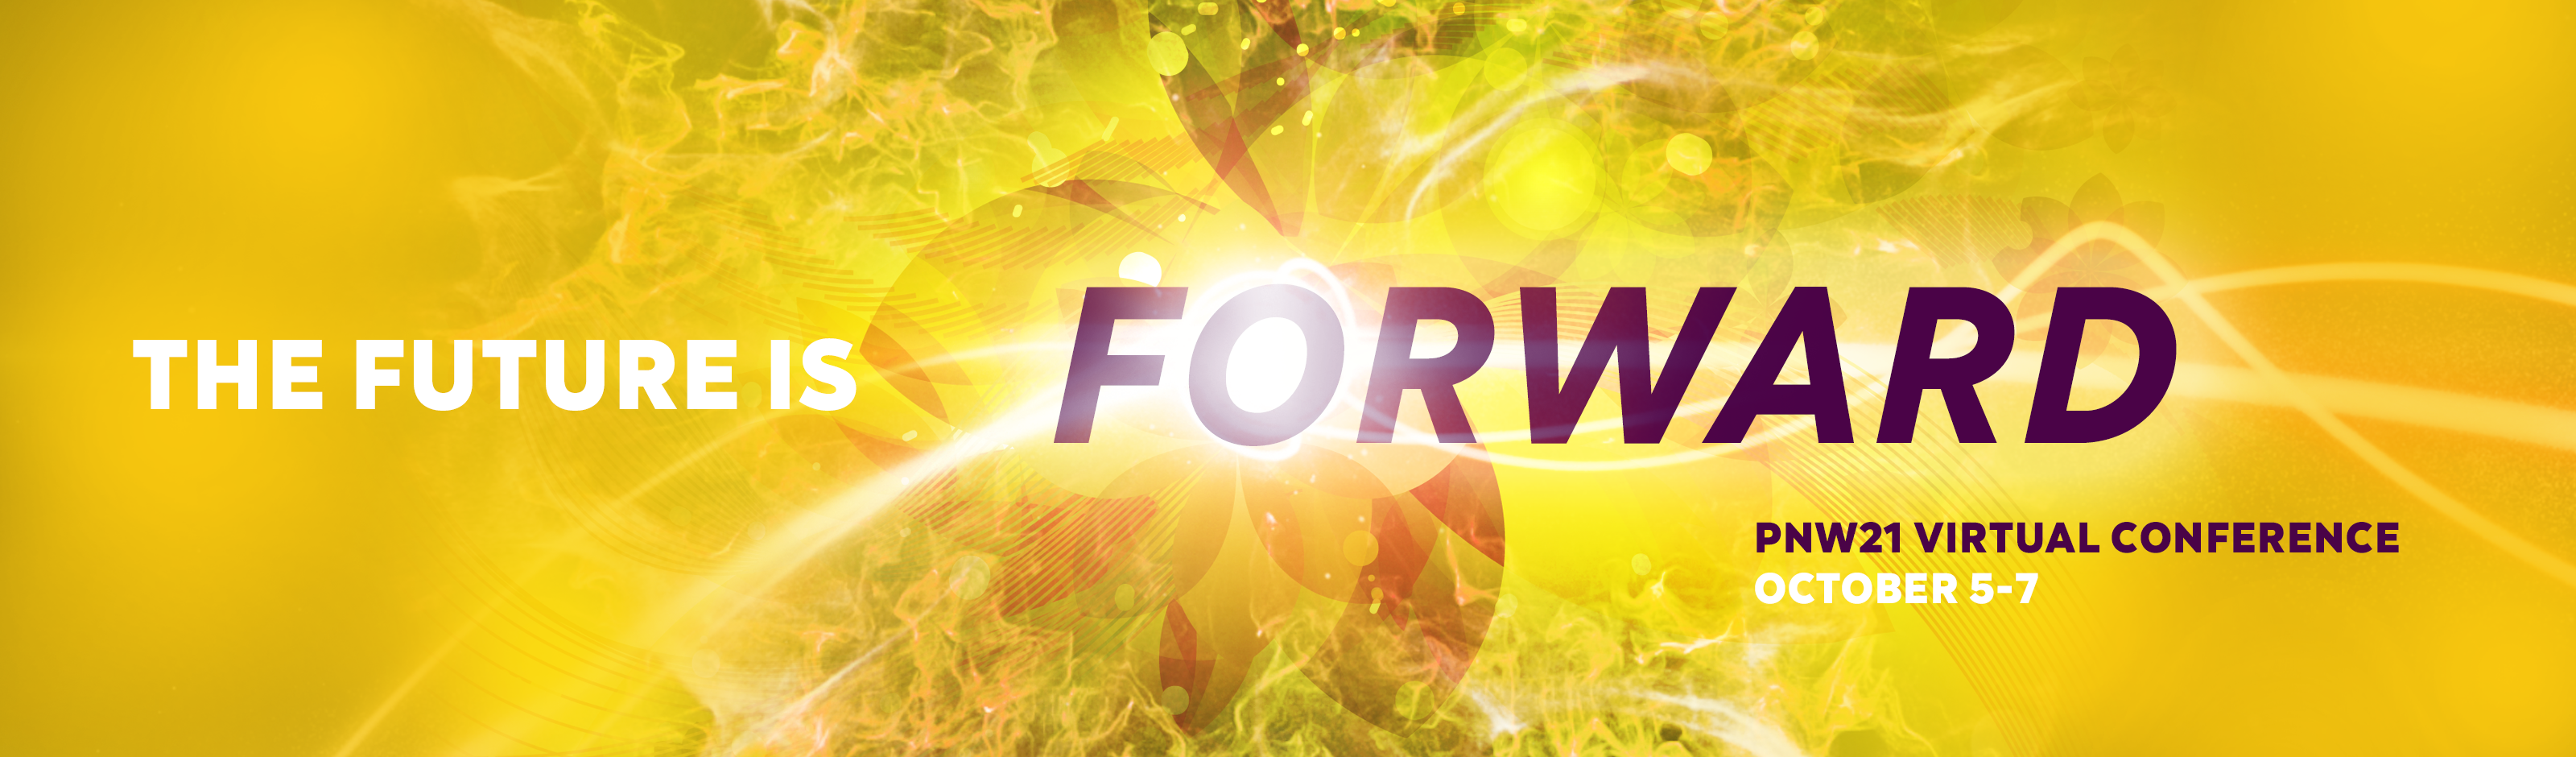 PNW21  Conference Banner: The Future is FORWARD. October 5-7, 2021